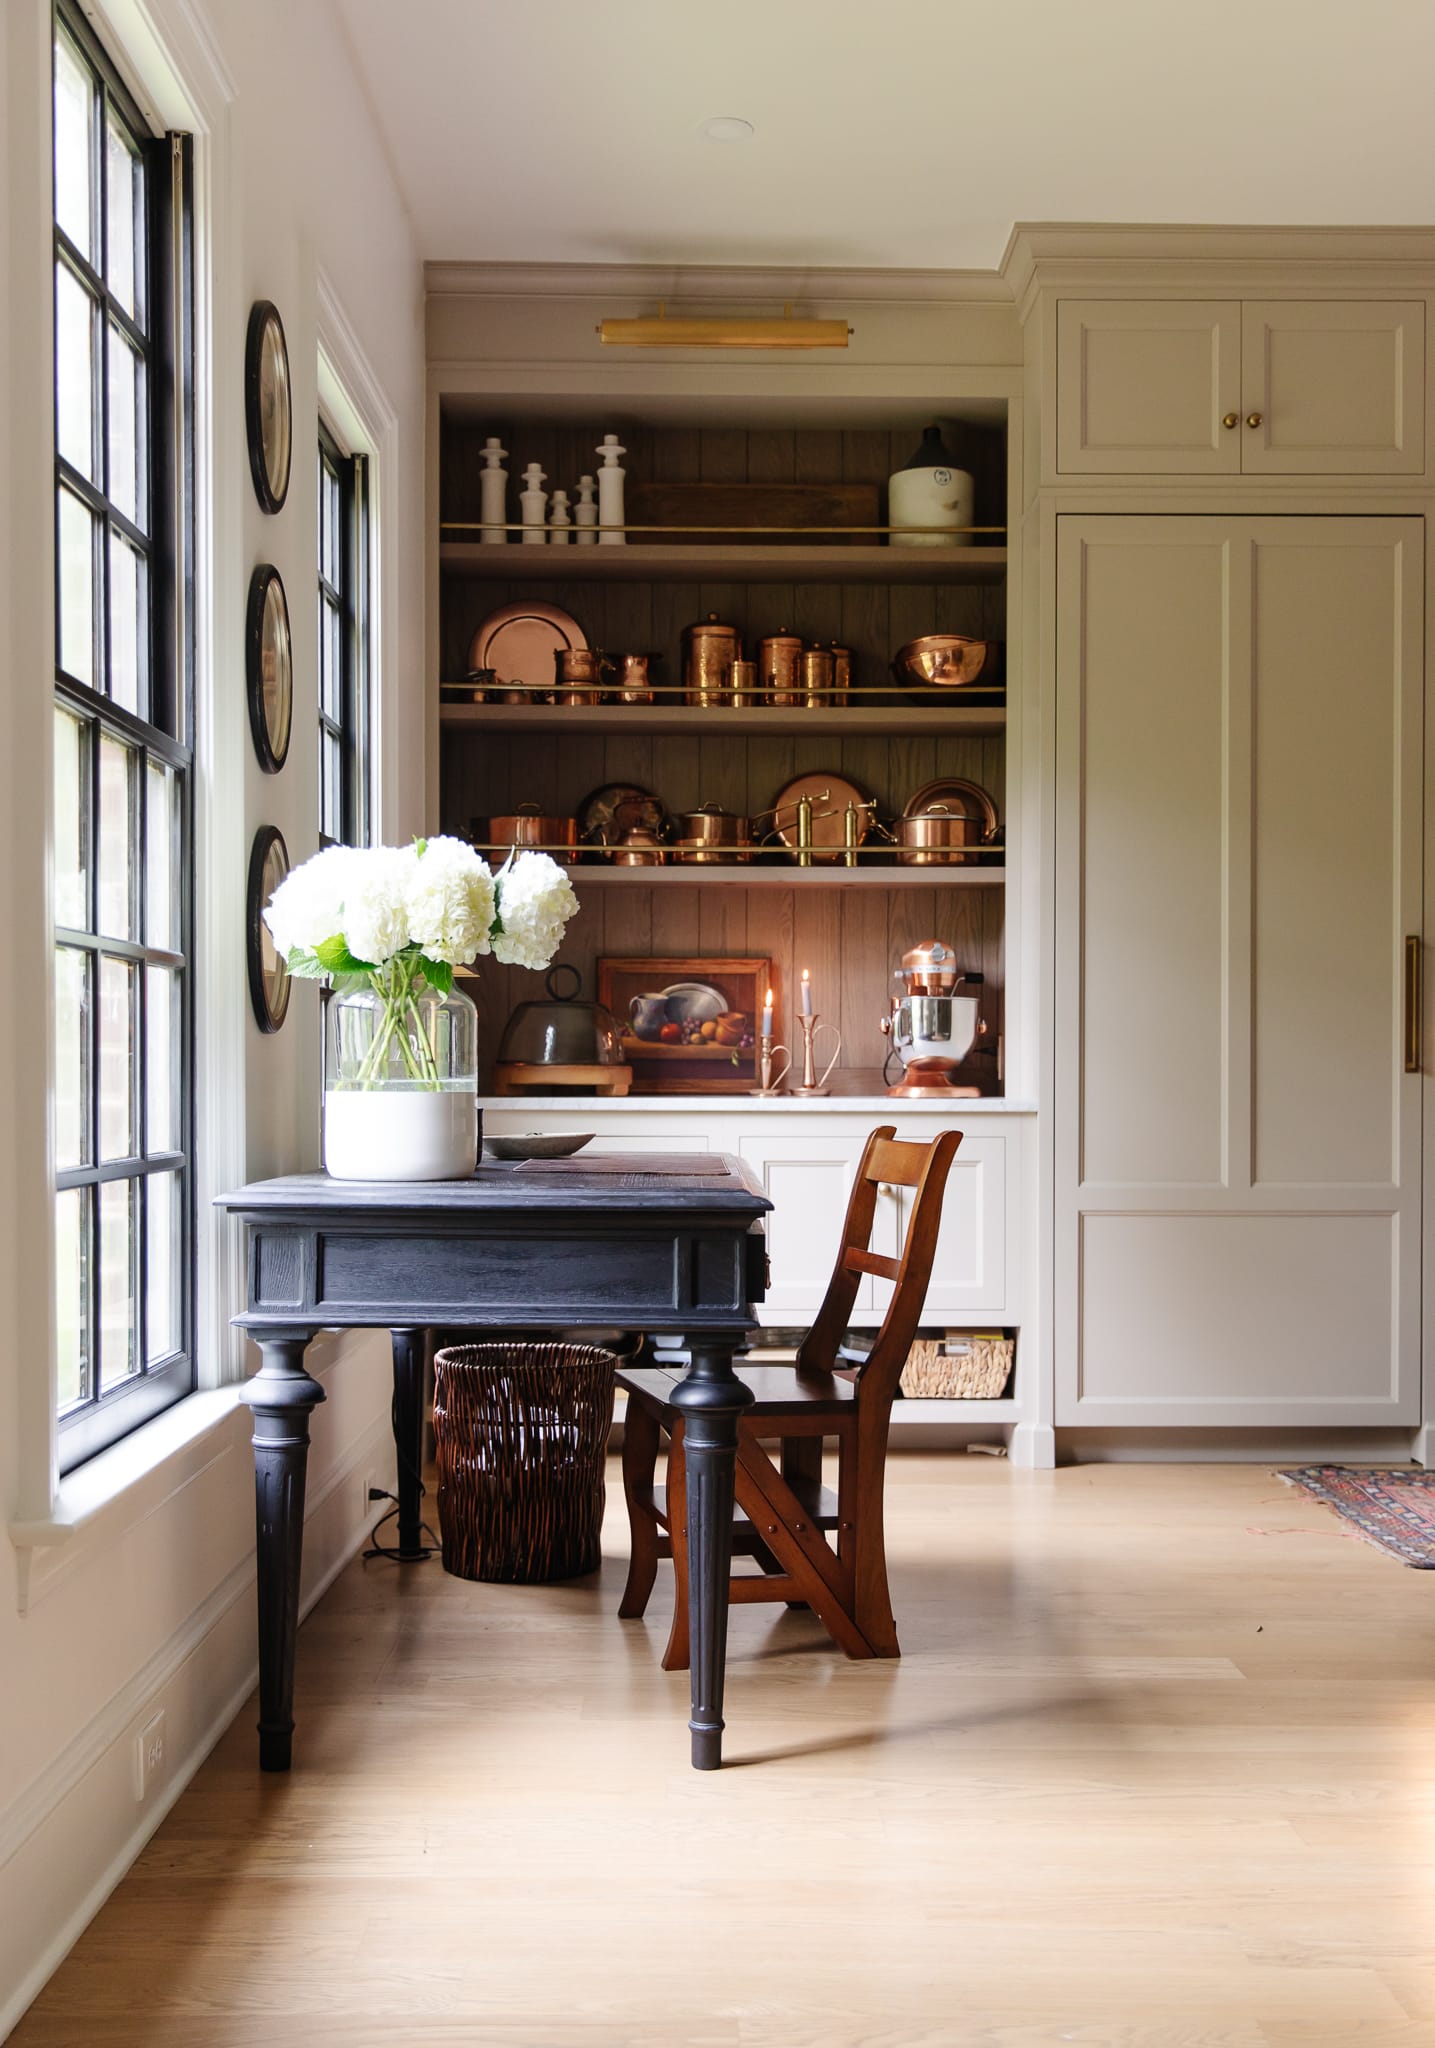 Chris Loves Julia | Kitchen with navy desk and copper pots